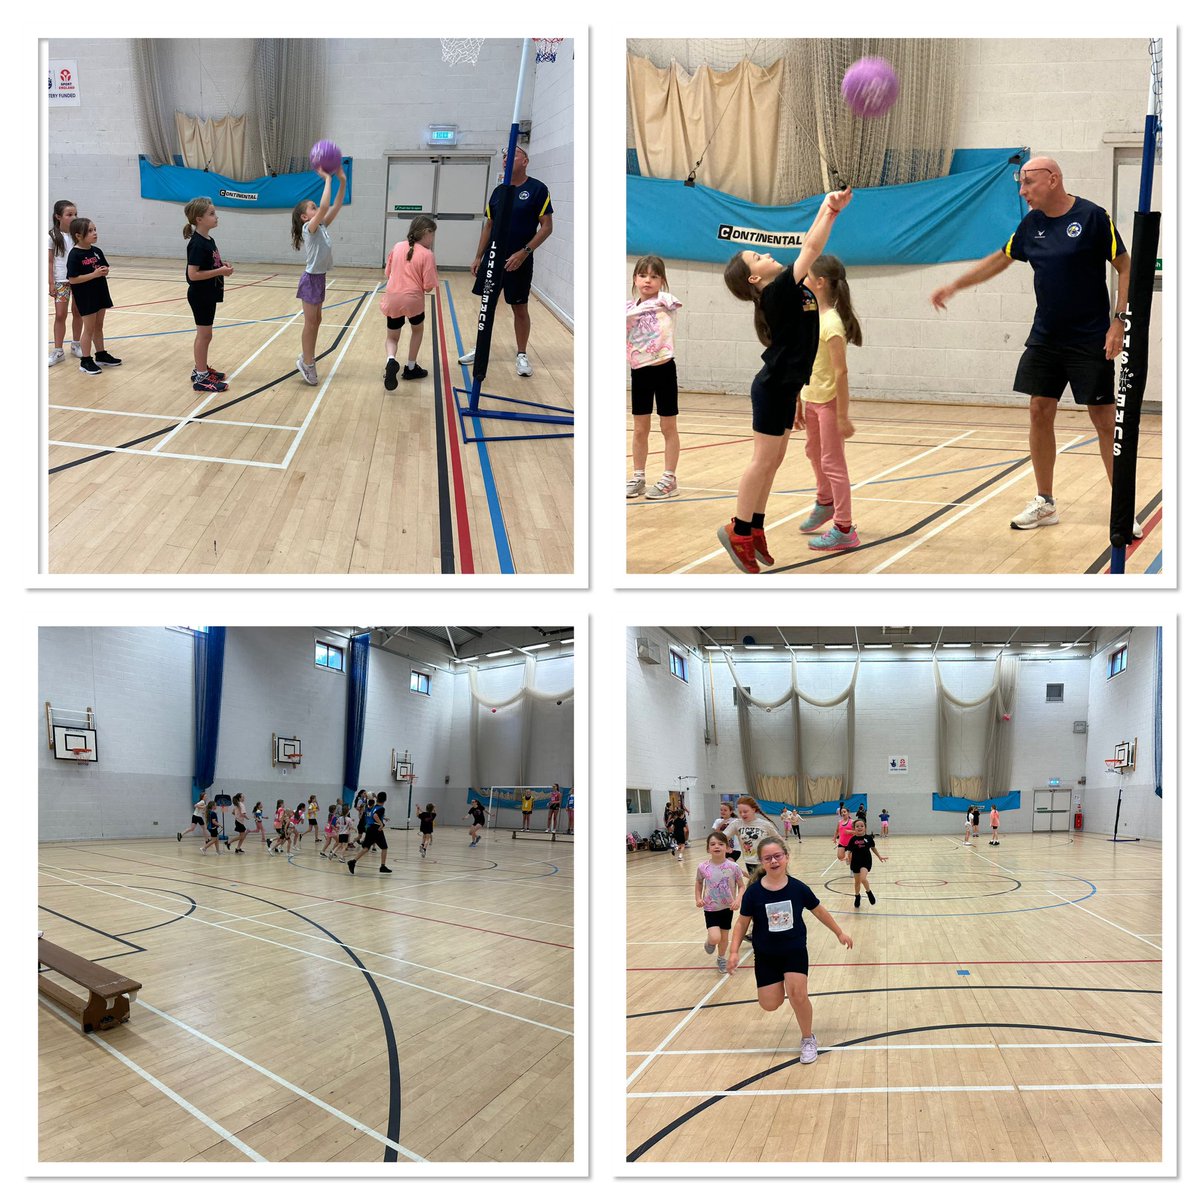 What a final day yesterday for our camp, a huge thank you to everybody who attended this year and a special thank you to all of our coaches for this week. Thank you to @JaneChisnall for organising and all of the companies who support us @active_tameside @Fuel_4_Fun @astleysports